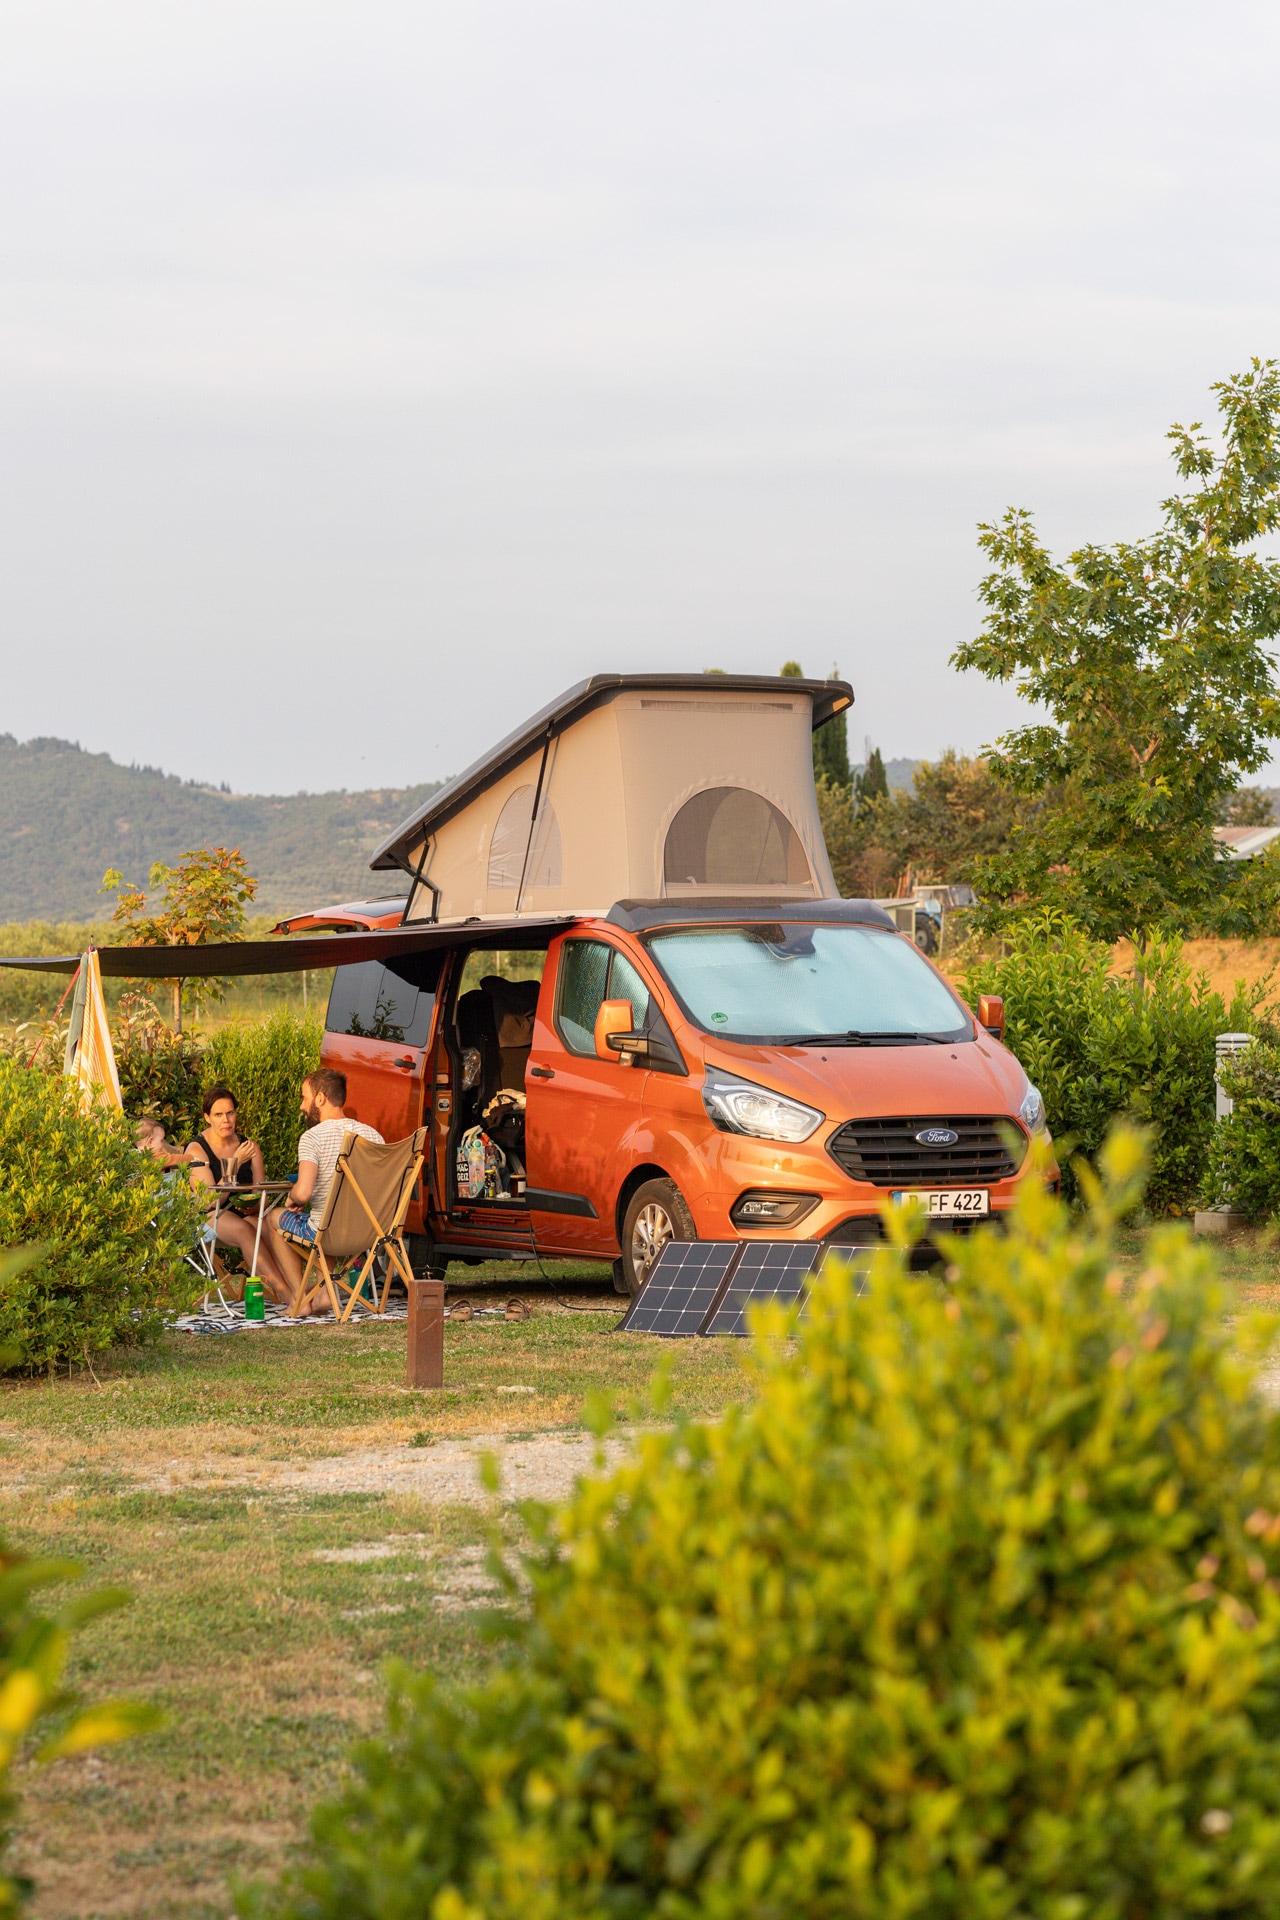 Parking areas for campers, trailers and caravans. Campsite in Cortona, Tuscany